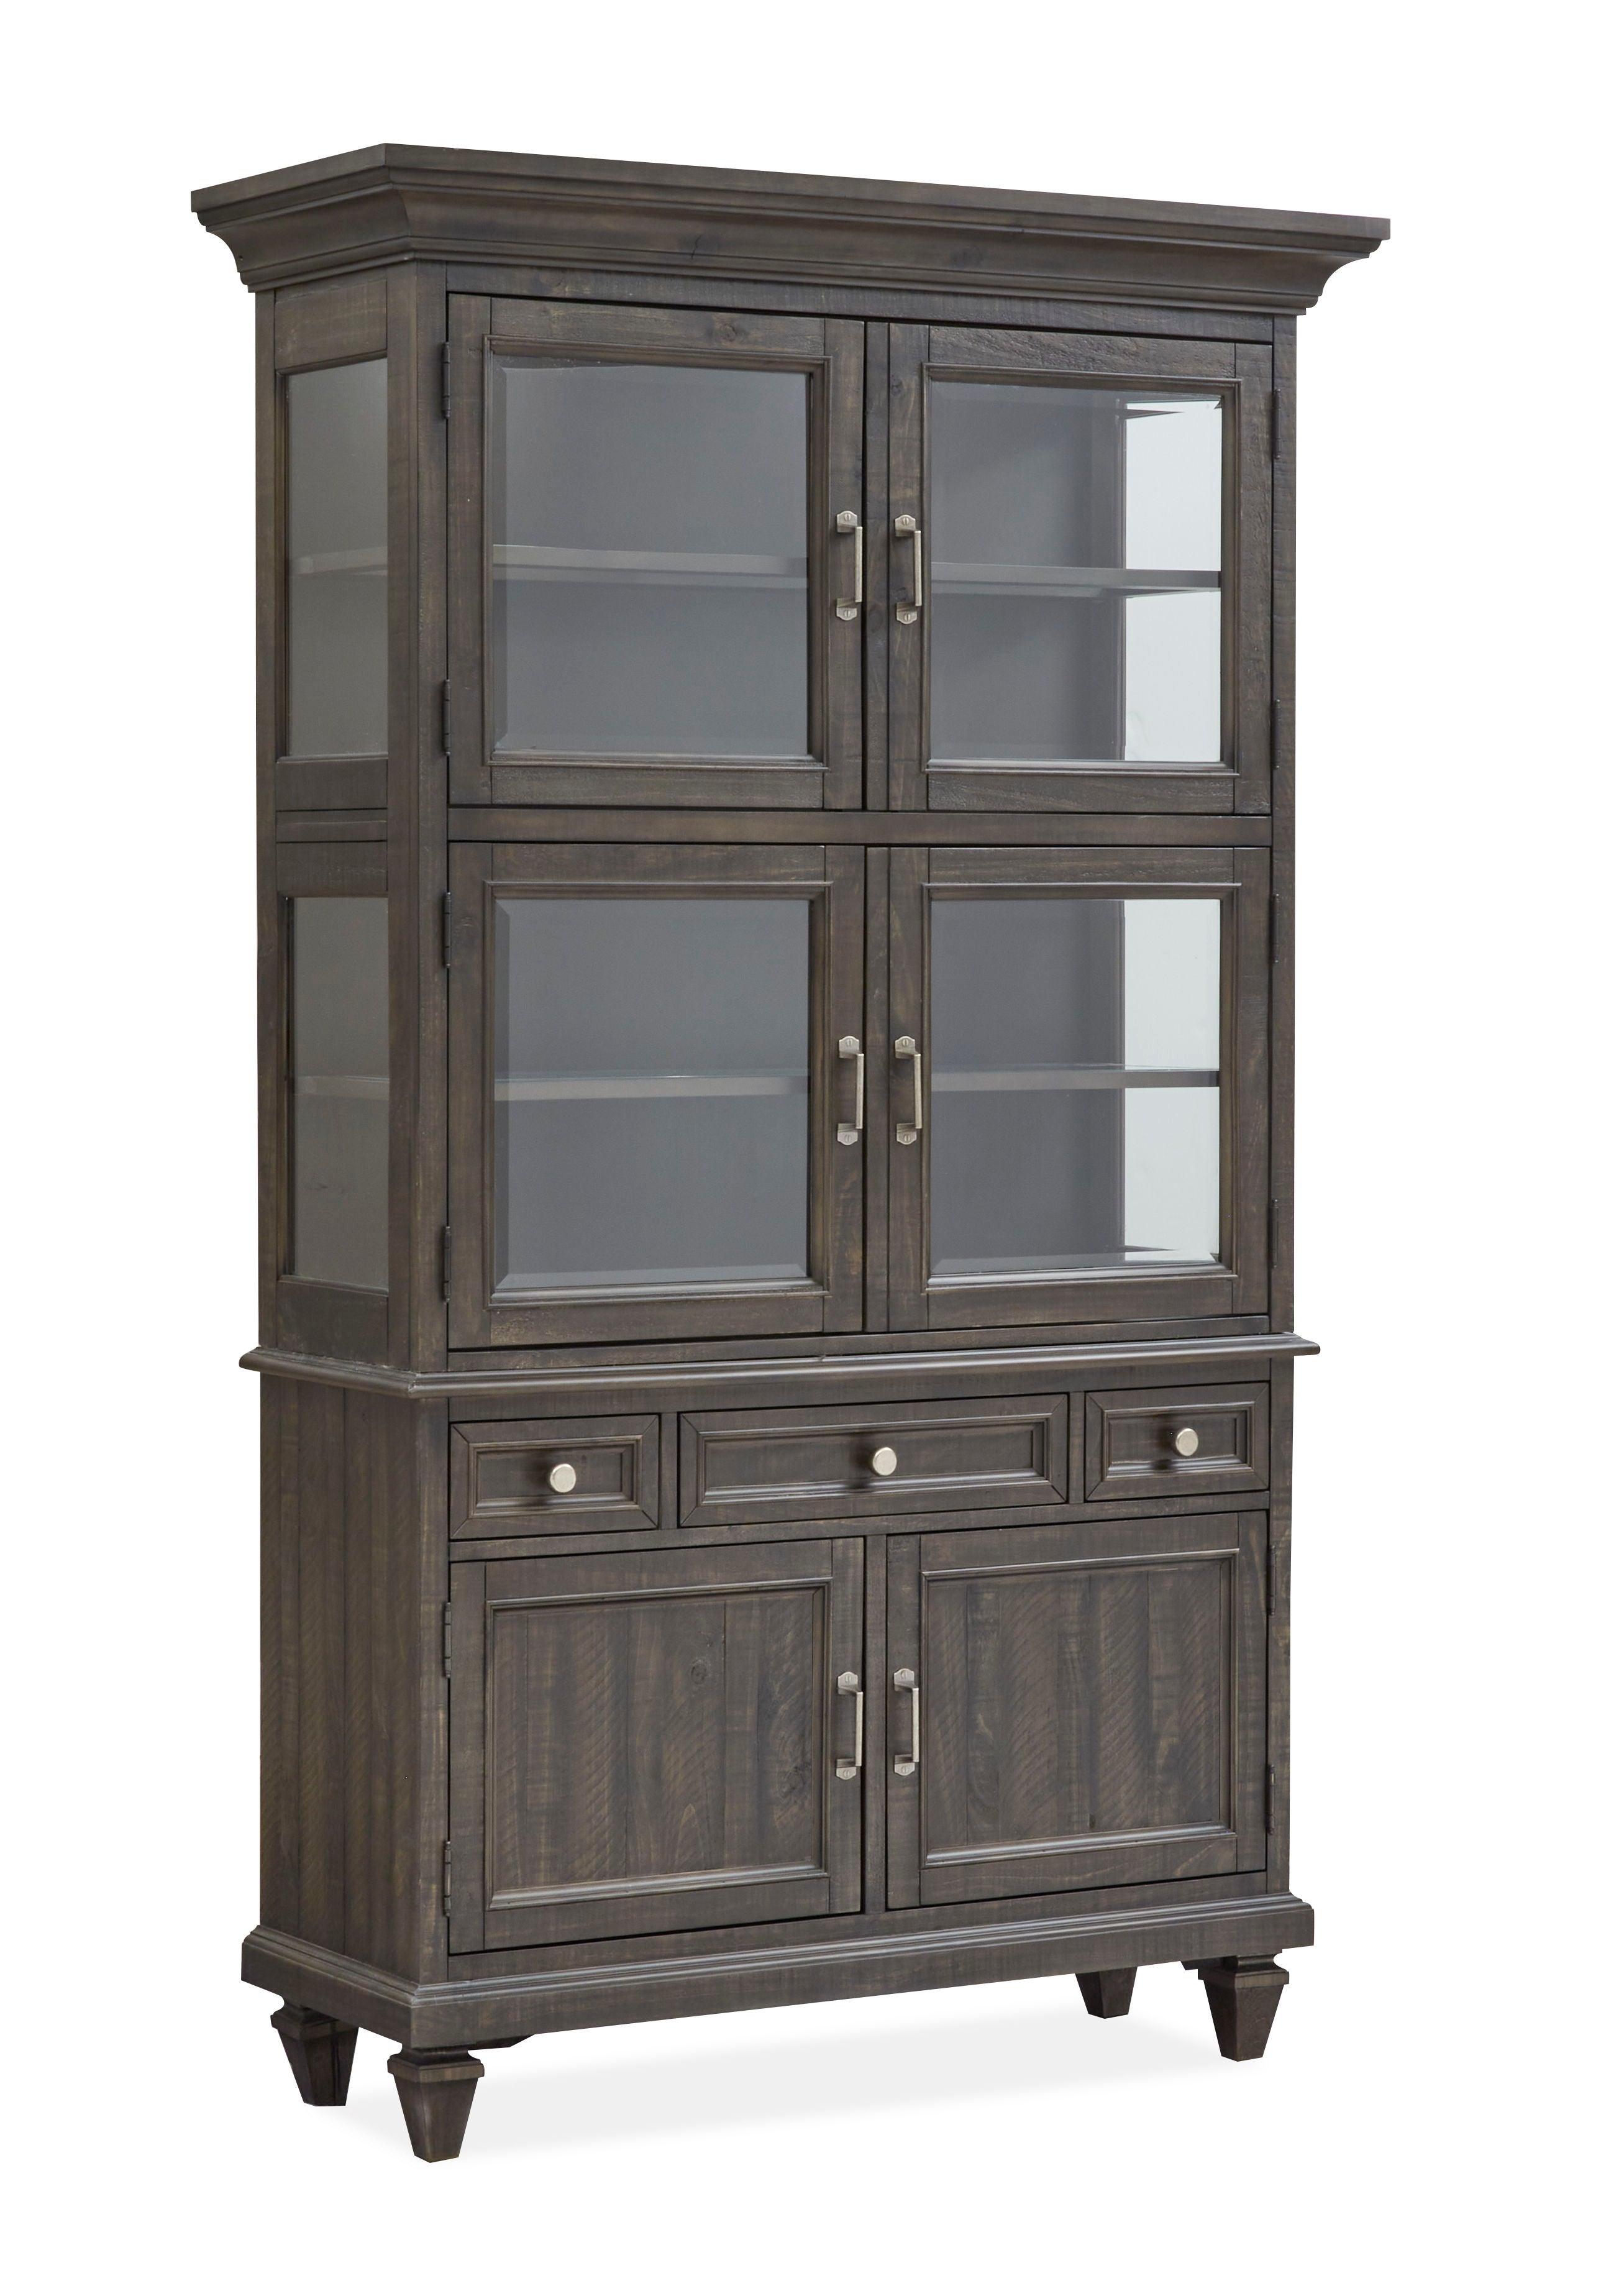 Magnussen Furniture - Calistoga - Dining Cabinet - Weathered Charcoal - 5th Avenue Furniture